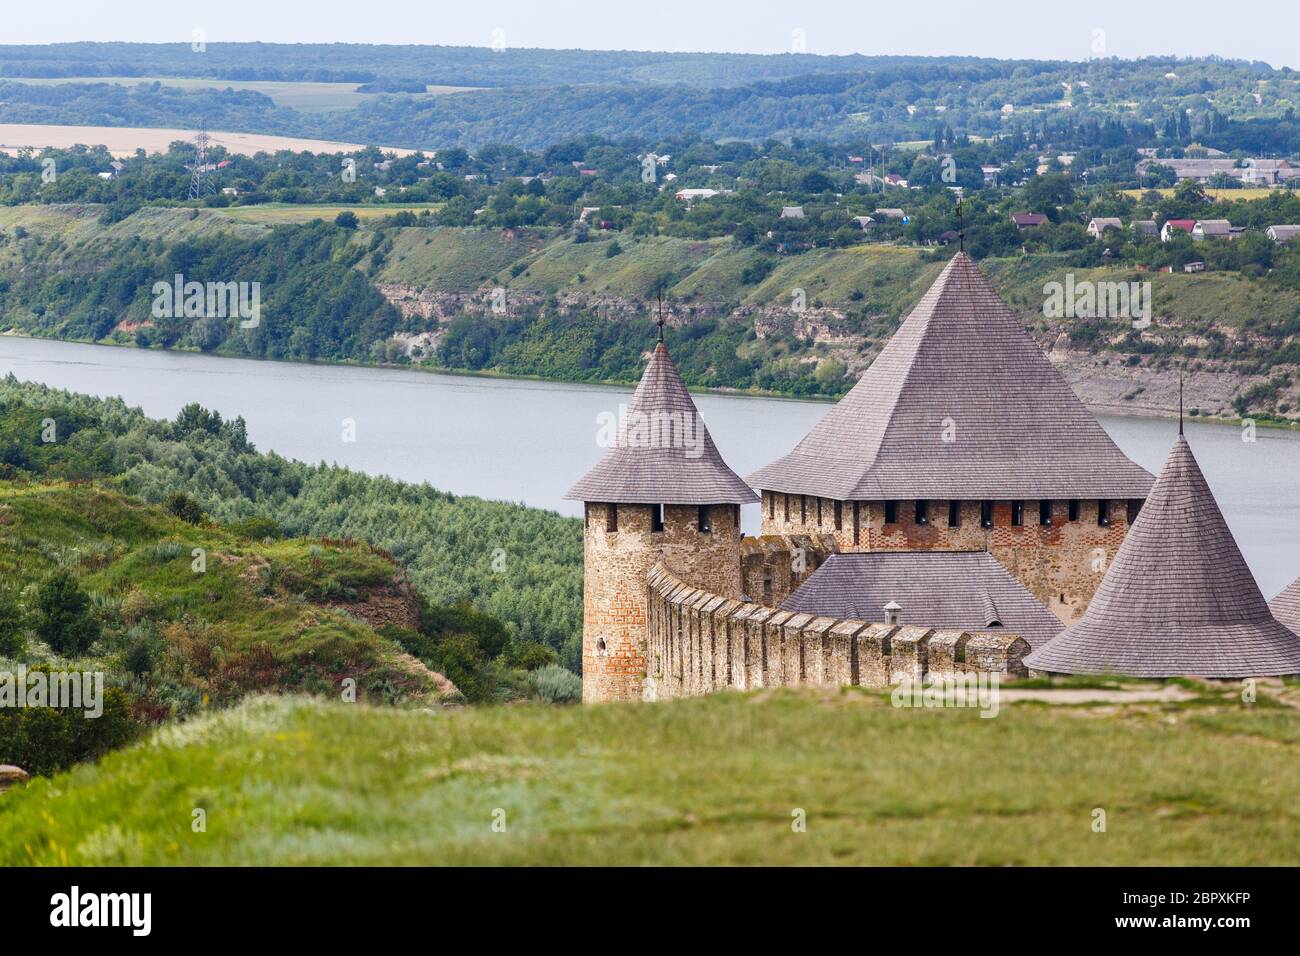 Khotyn castle - ancient Kyiv Rus fortress on Dniester river Stock Photo